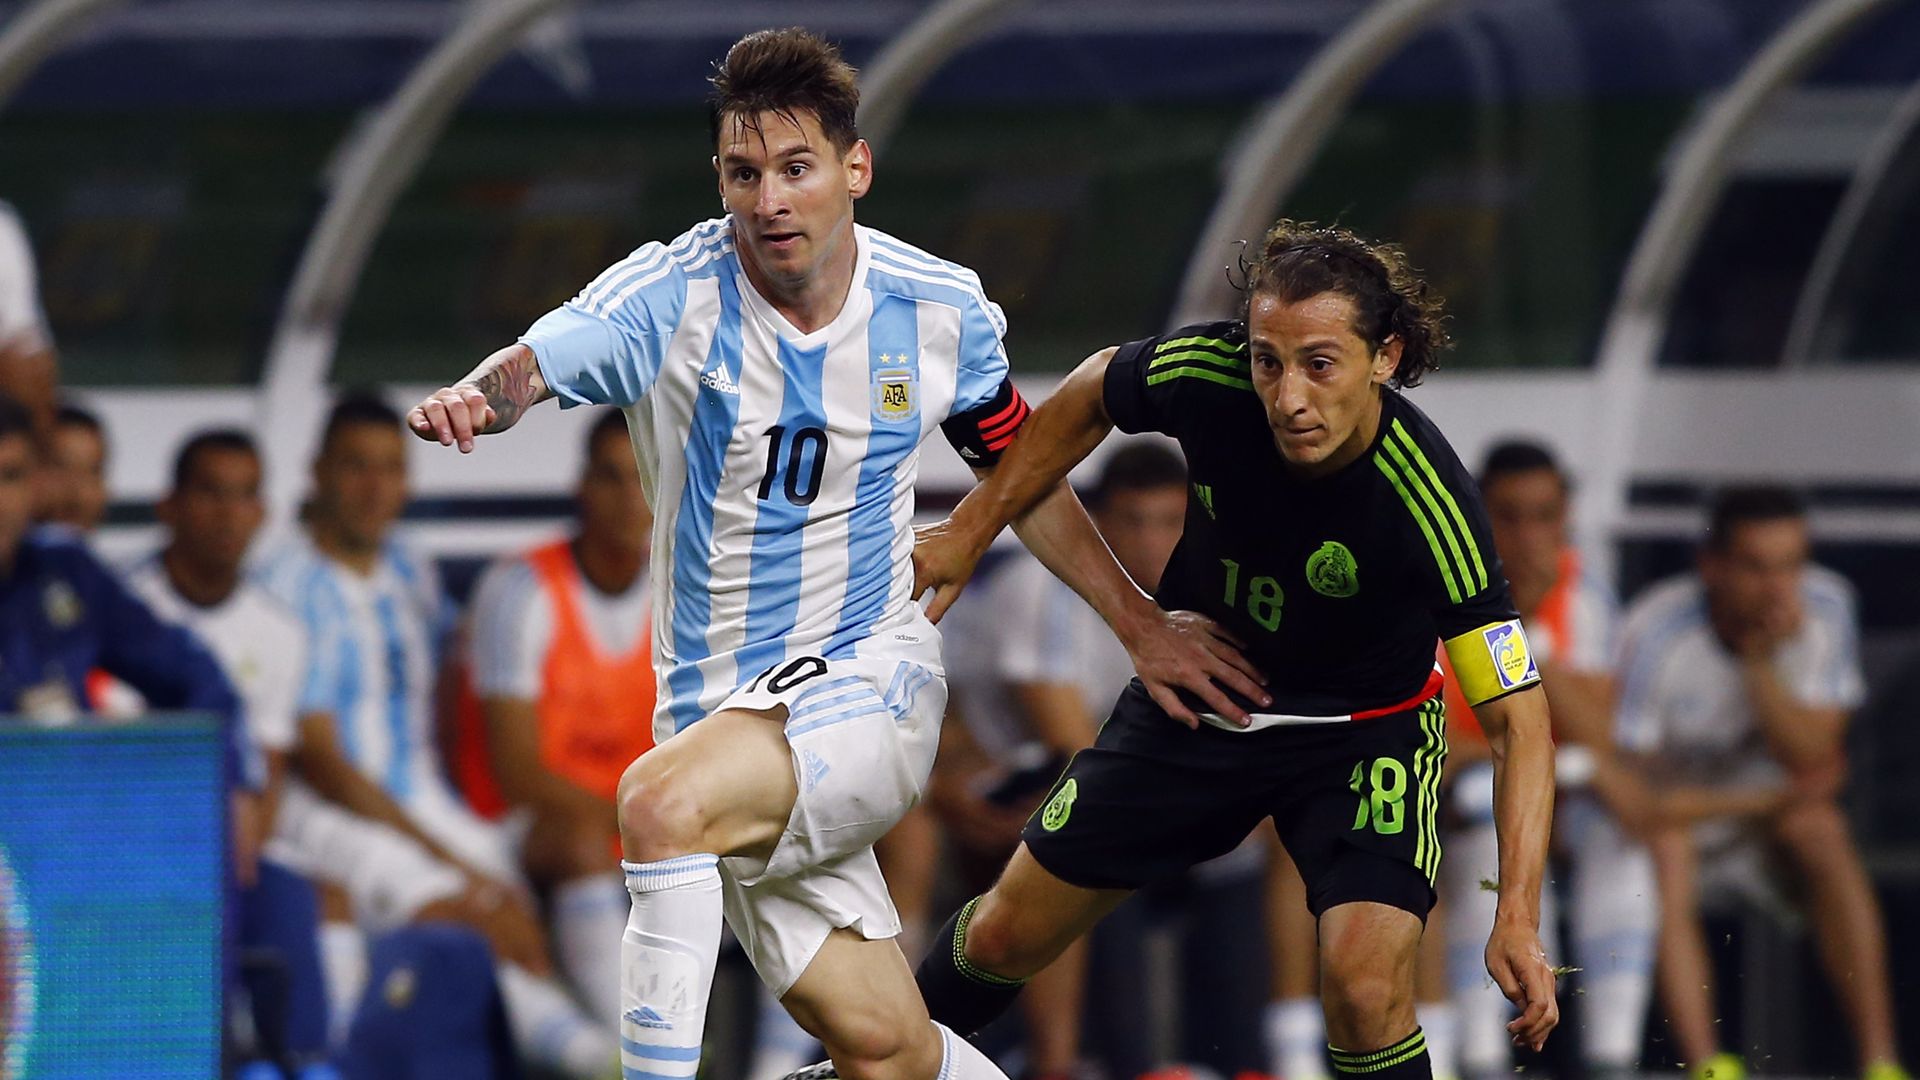 Alan Velasco inspired by Lionel Messi en route to Argentina